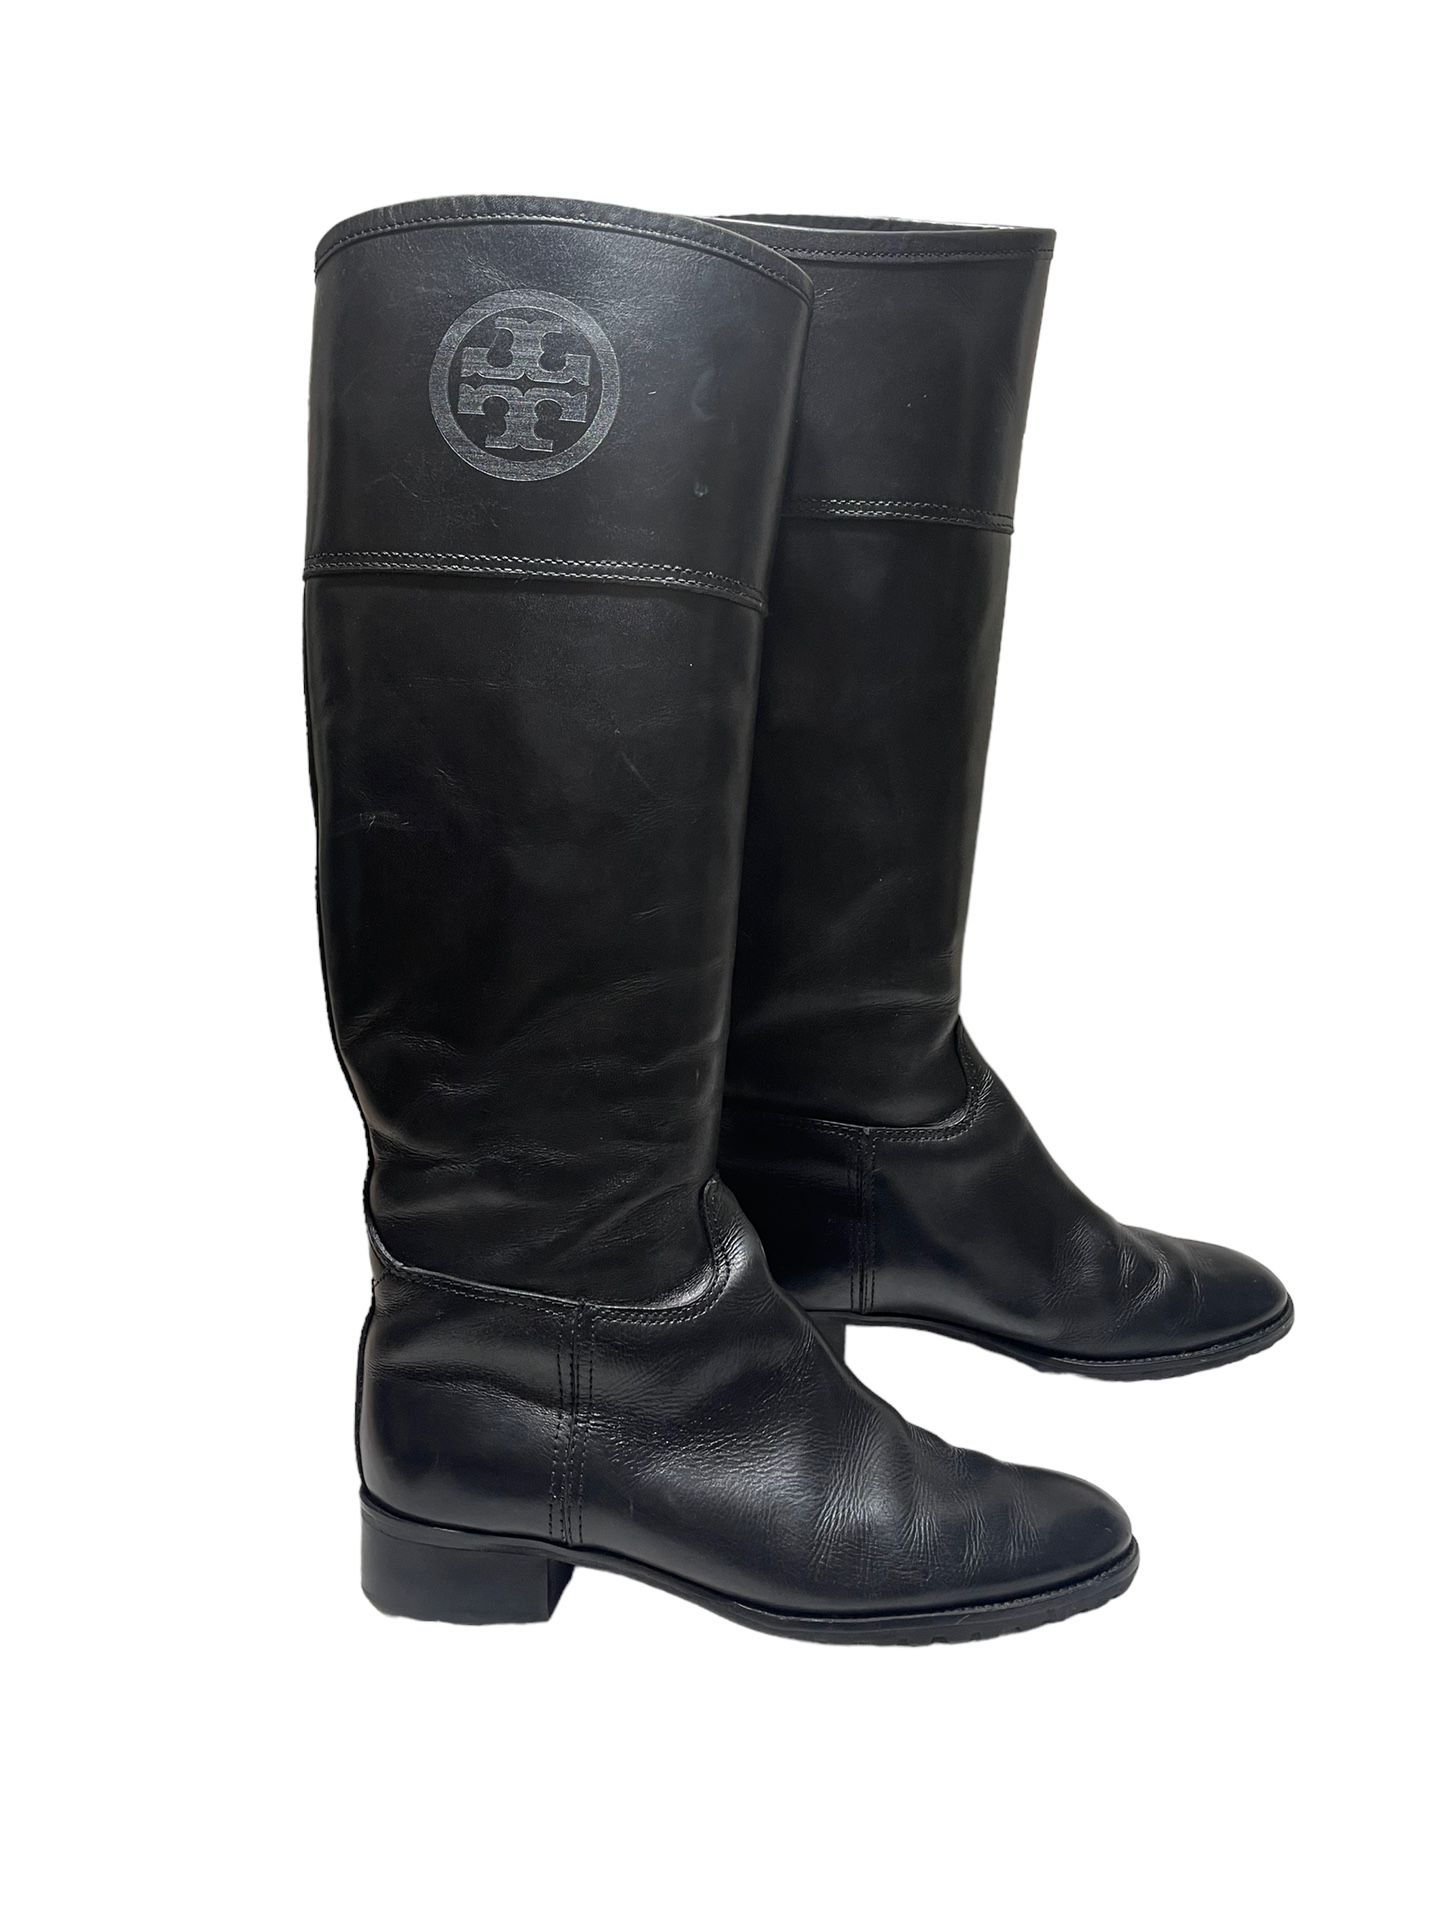 Tory Burch Tall High Black Leather Riding Boots Size 8 for Sale in Houston,  TX - OfferUp